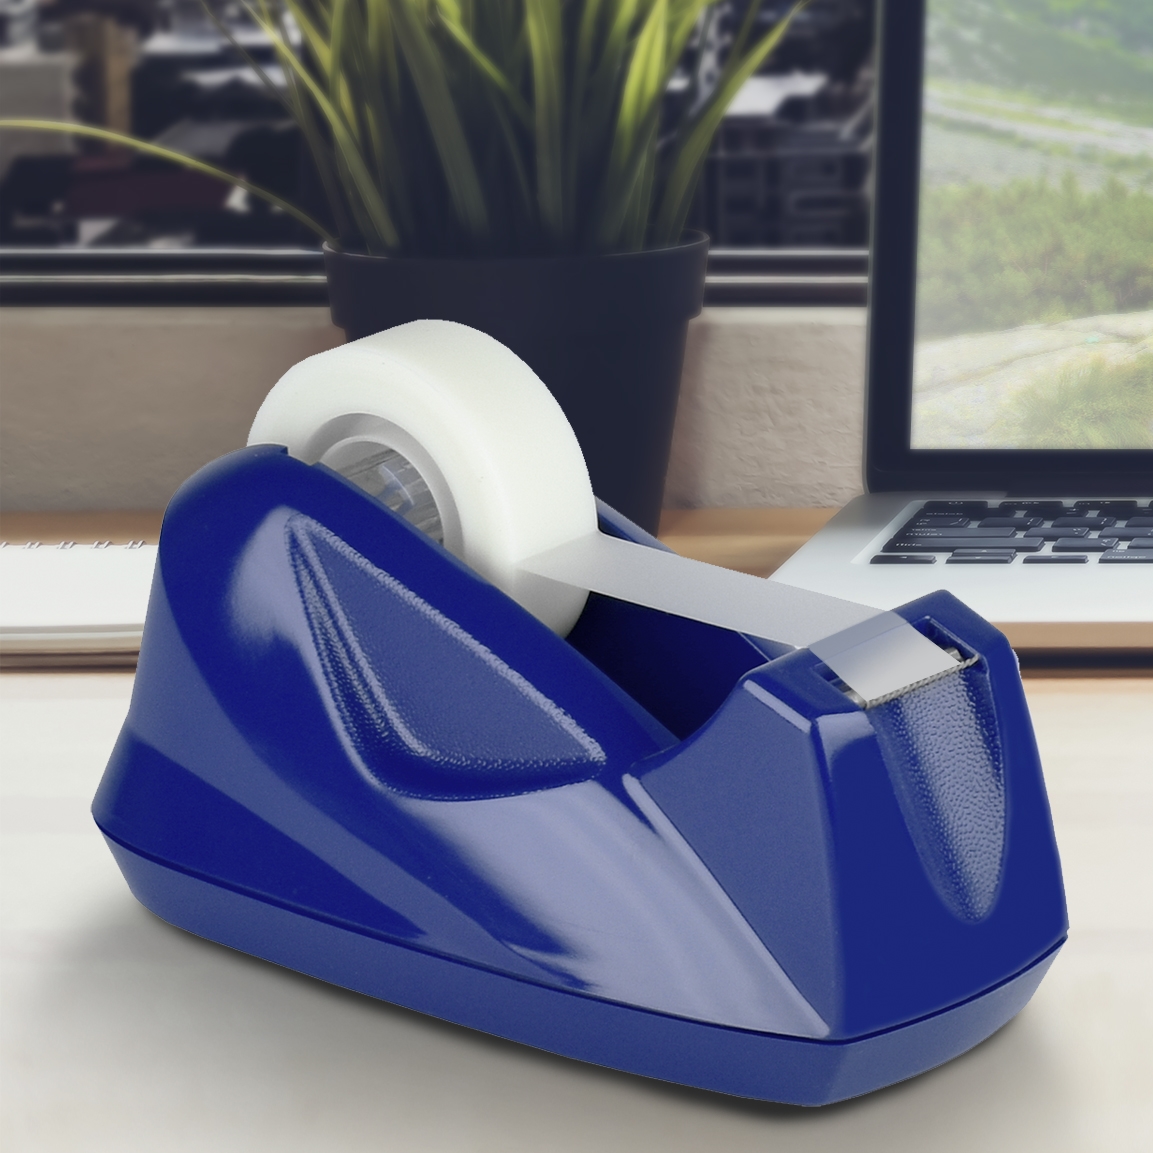 1pc Sublimation Blue Tape Dispenser, Desktop Tape Holder For Multiple Rolls  Of Heat Transfer Tape, Pre-cut 1.4 Inches (about 3.6 Cm) For Industrial Use  In Tape Segmentation Machine